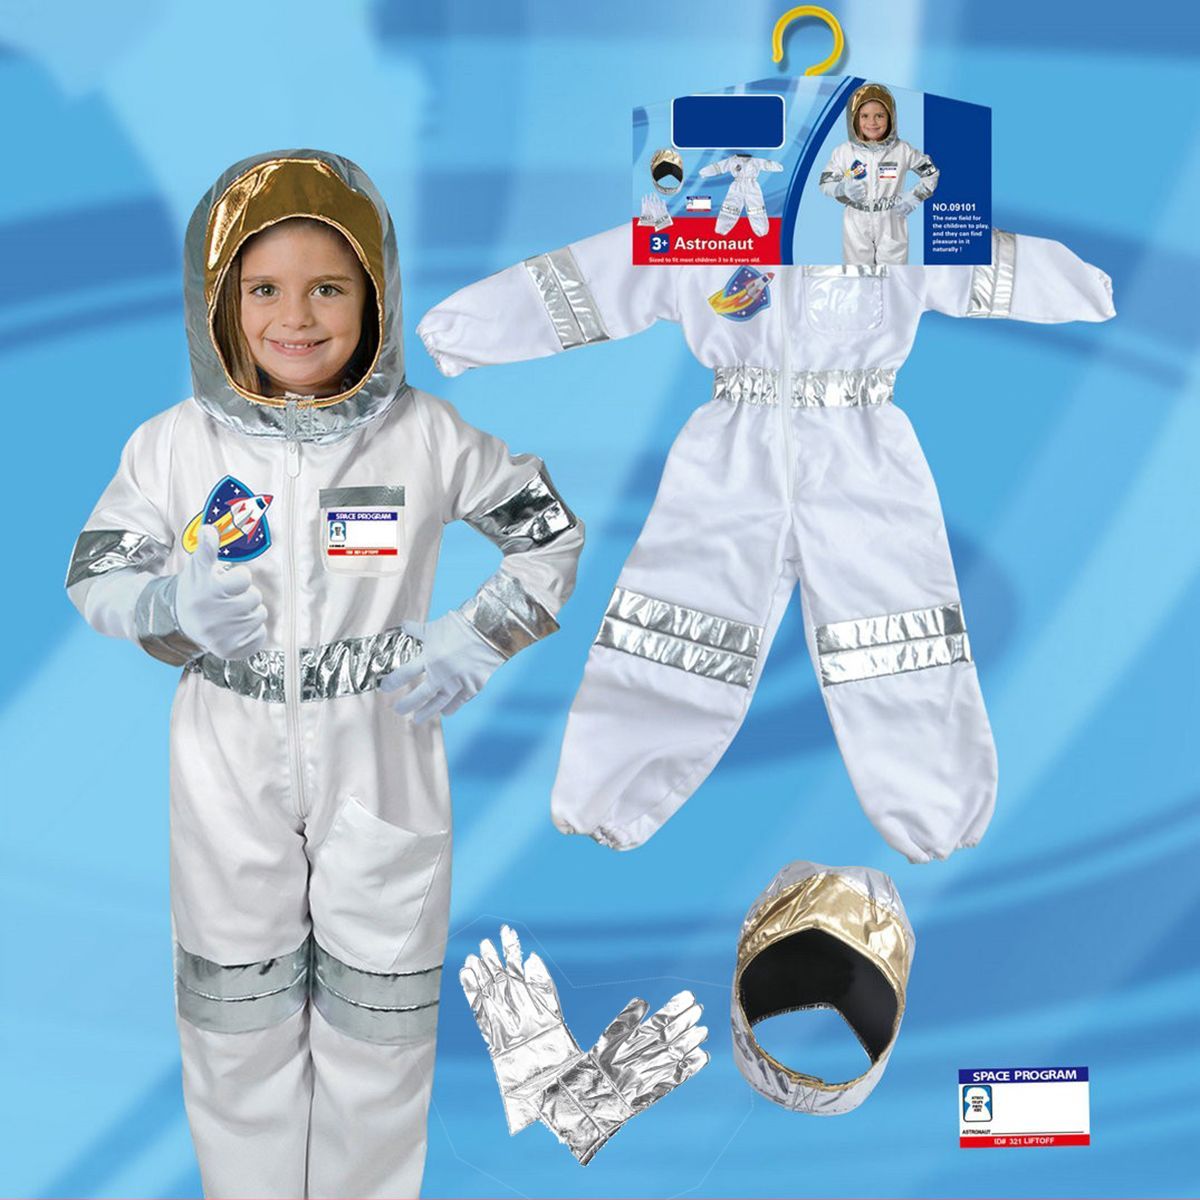 Childs-Kids-Astronaut-Costume-Space-Suit-Toddler-Astronaut-Role-Play-Props-1578933